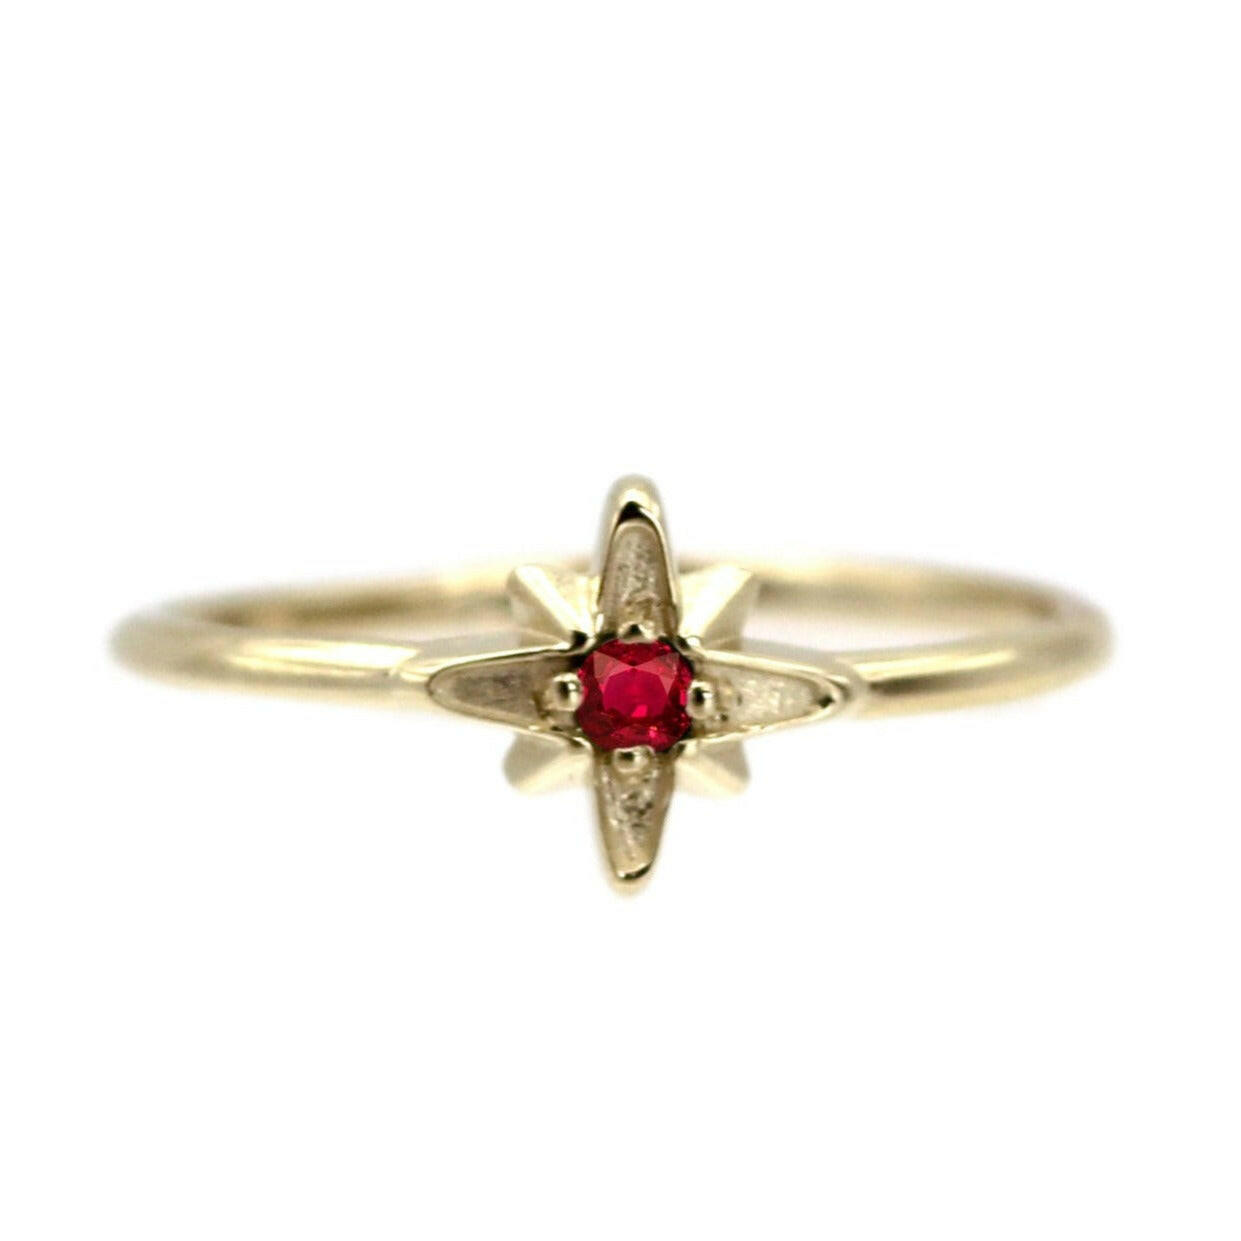 Mini Rings 14K Yellow Gold / Red Garnet - January / We Will Contact You After The Order Is Placed to Confirm Your Size! | Misahara